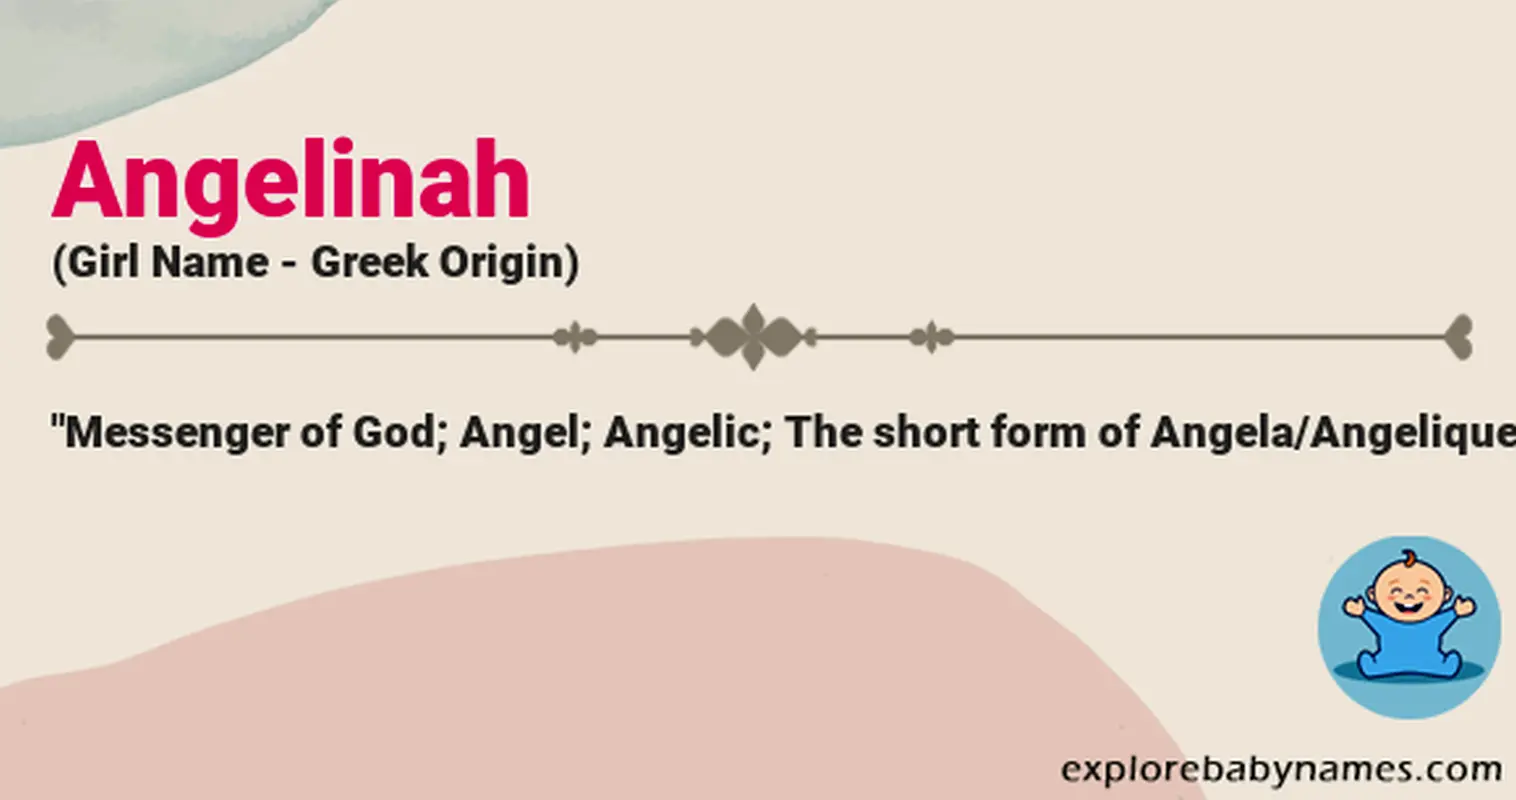 Meaning of Angelinah